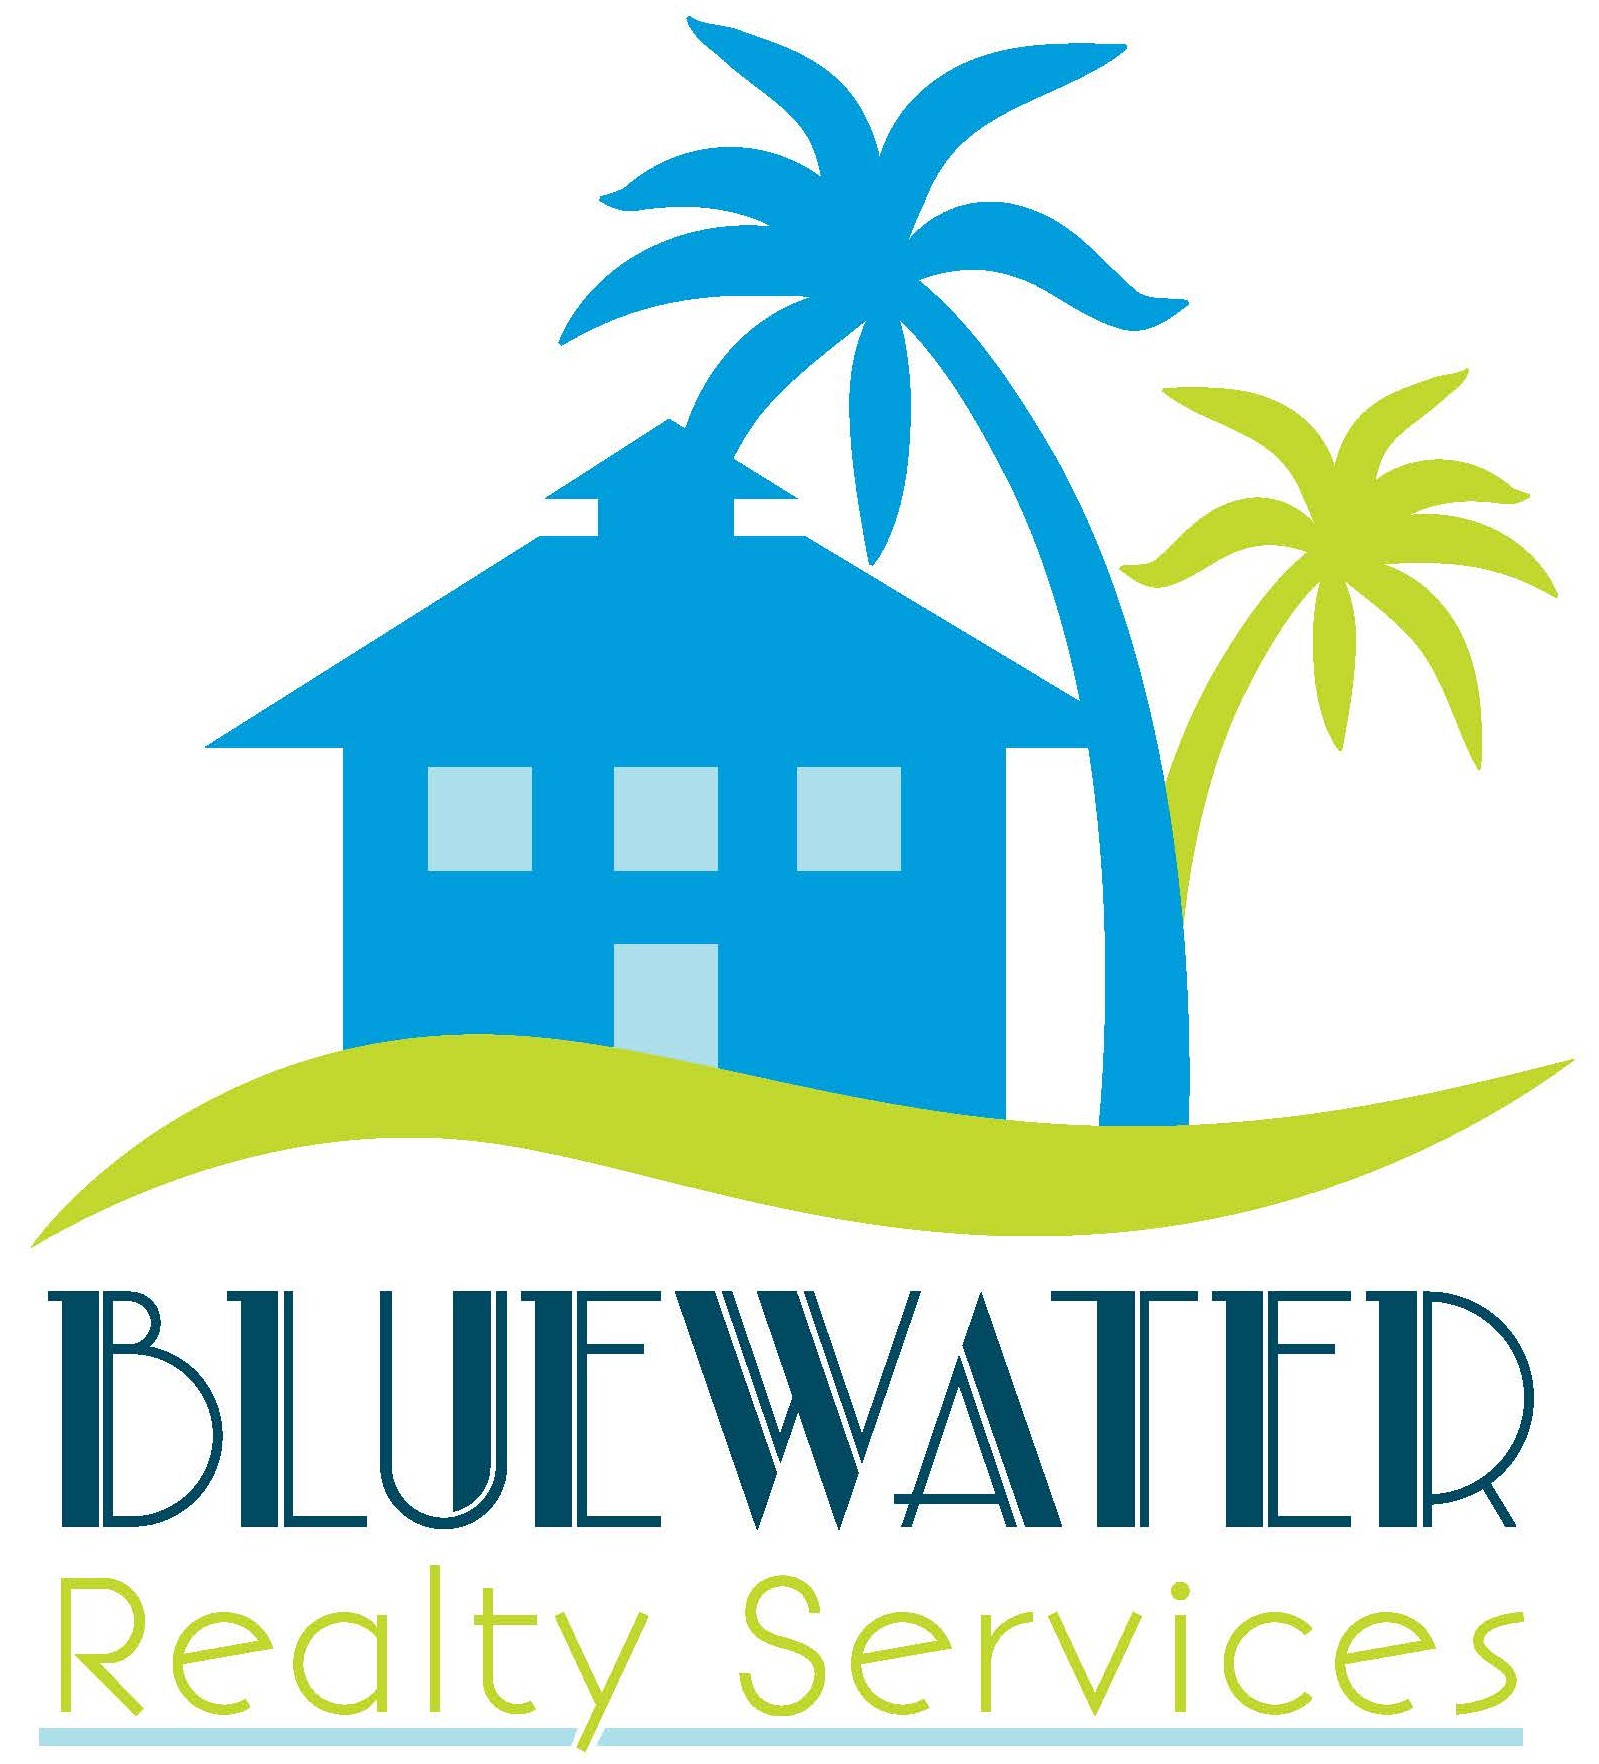 Real estate service. Bluewaters Residences лого. Realty. Realty телефон. Real Estate services.